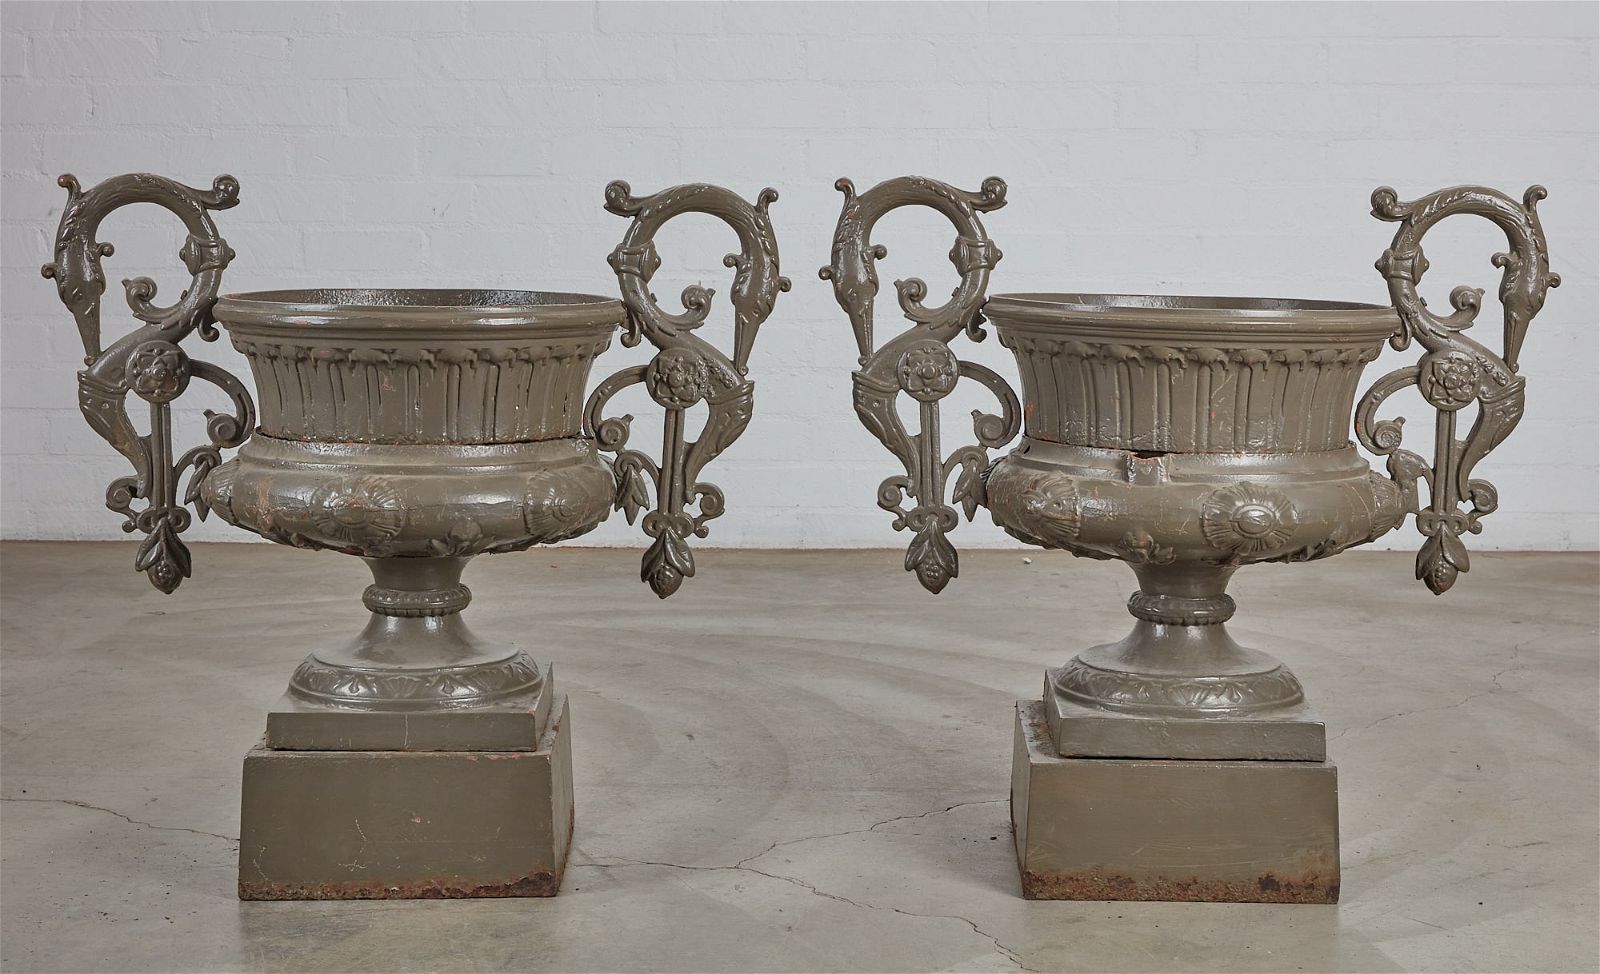 A PAIR OF NEOCLASSICAL STYLE CAST 2fb339a